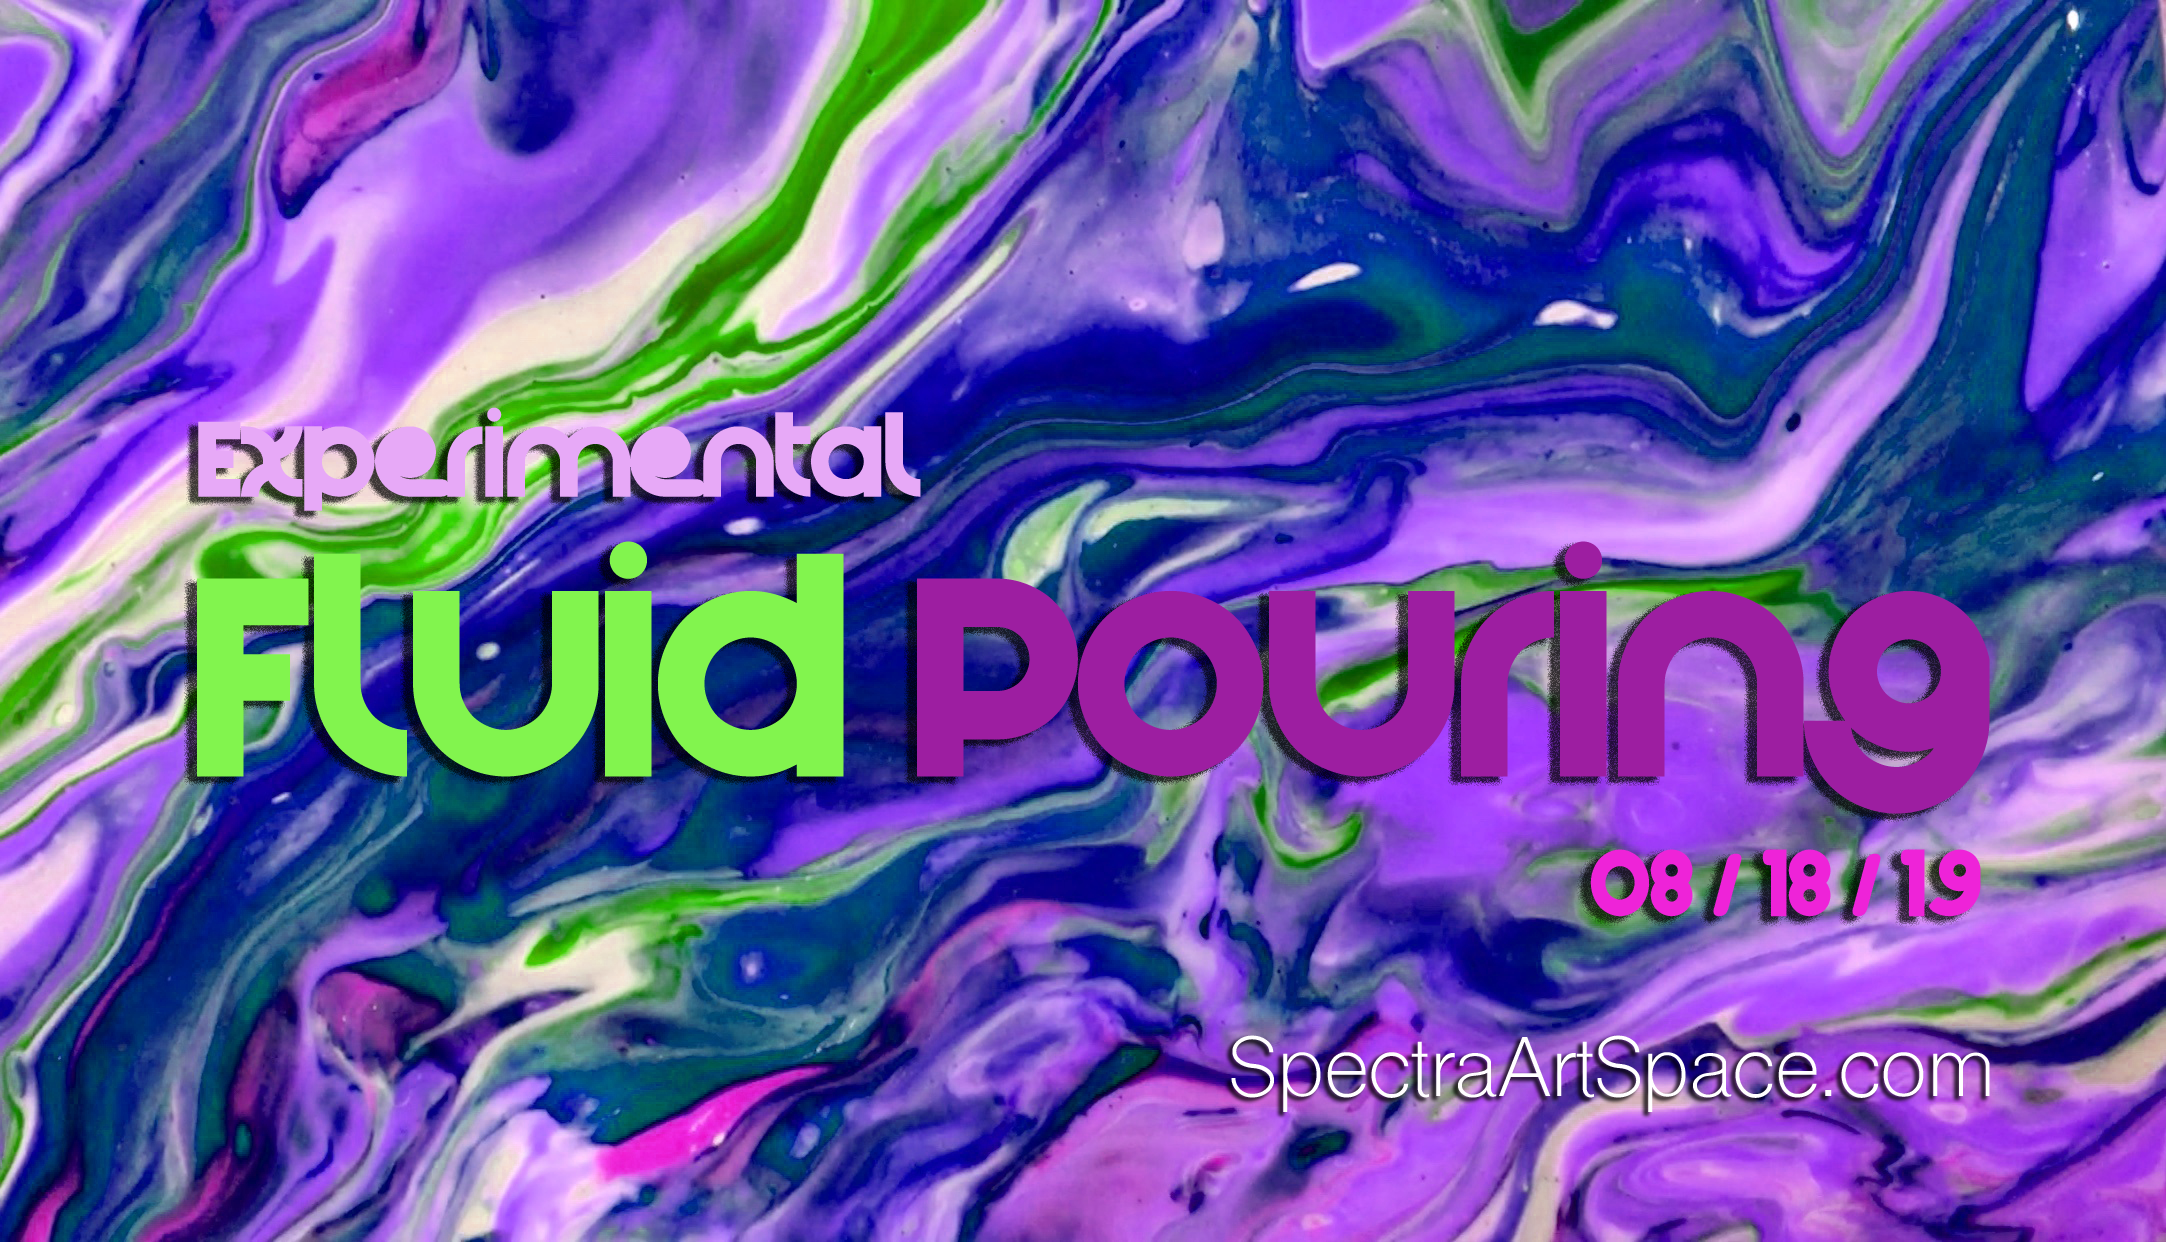 Experimental Fluid Pouring Painting Class | Sunday, 09. 15